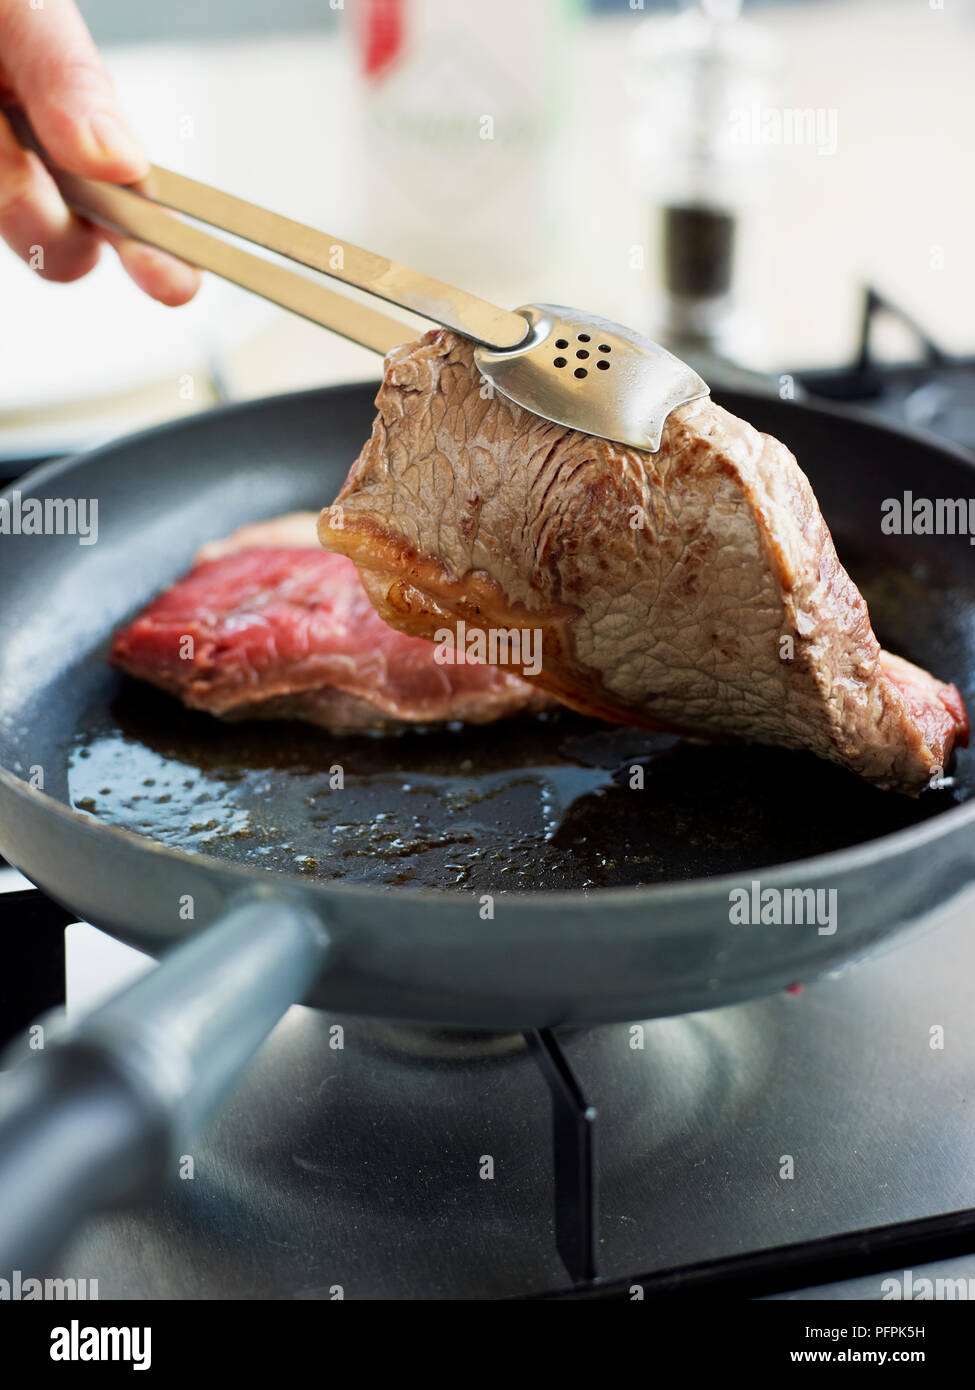 Lifting steak with tongs to check underside Stock Photo